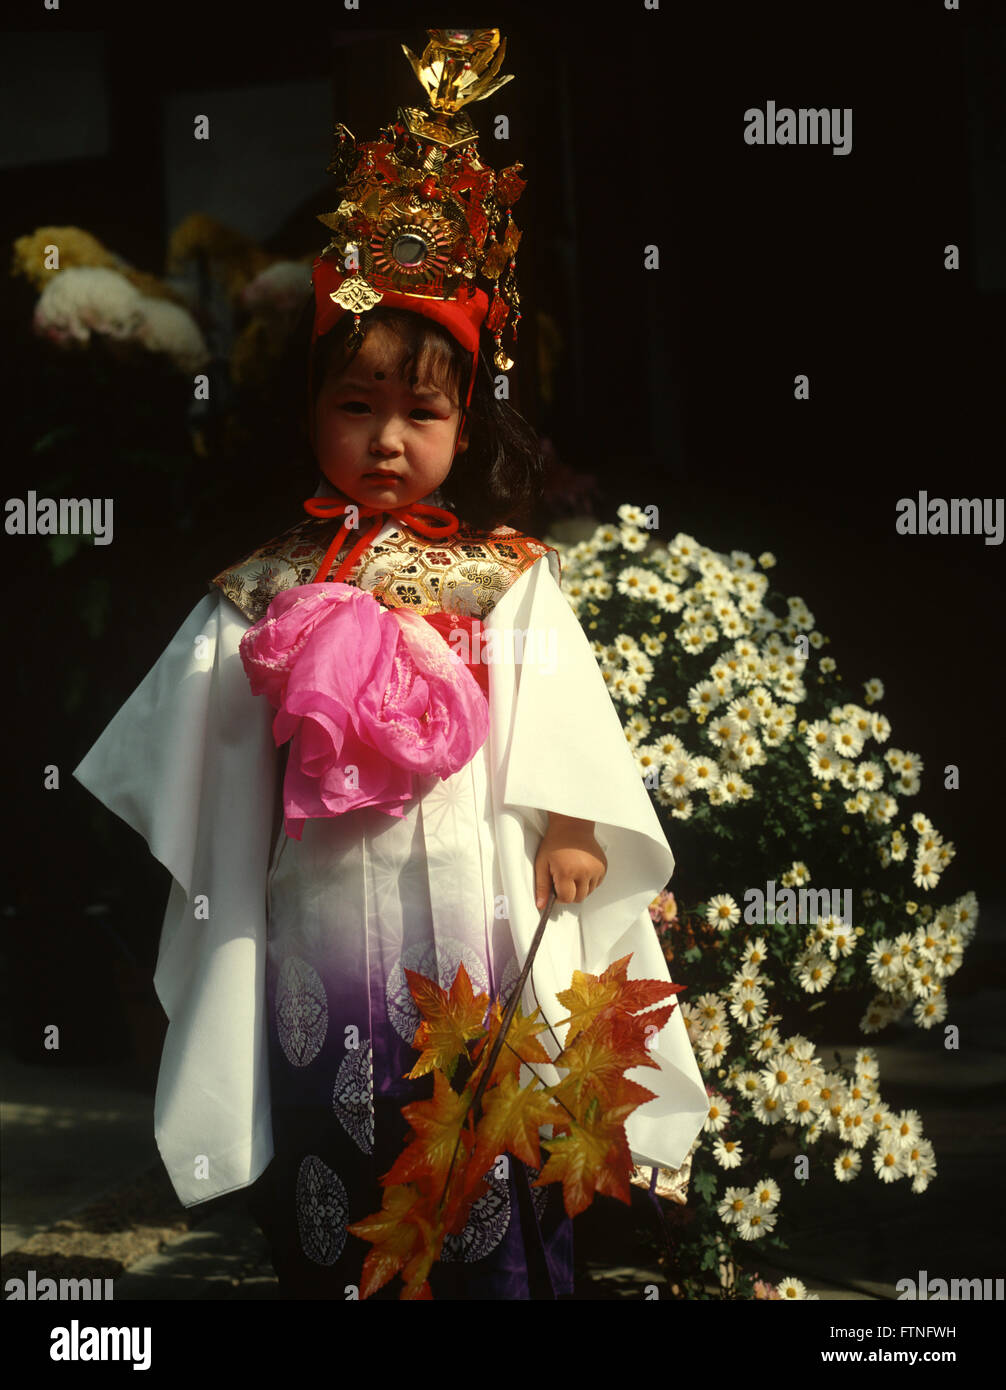 Japan, Japanese child dresed in traditional costume for a festival. Stock Photo